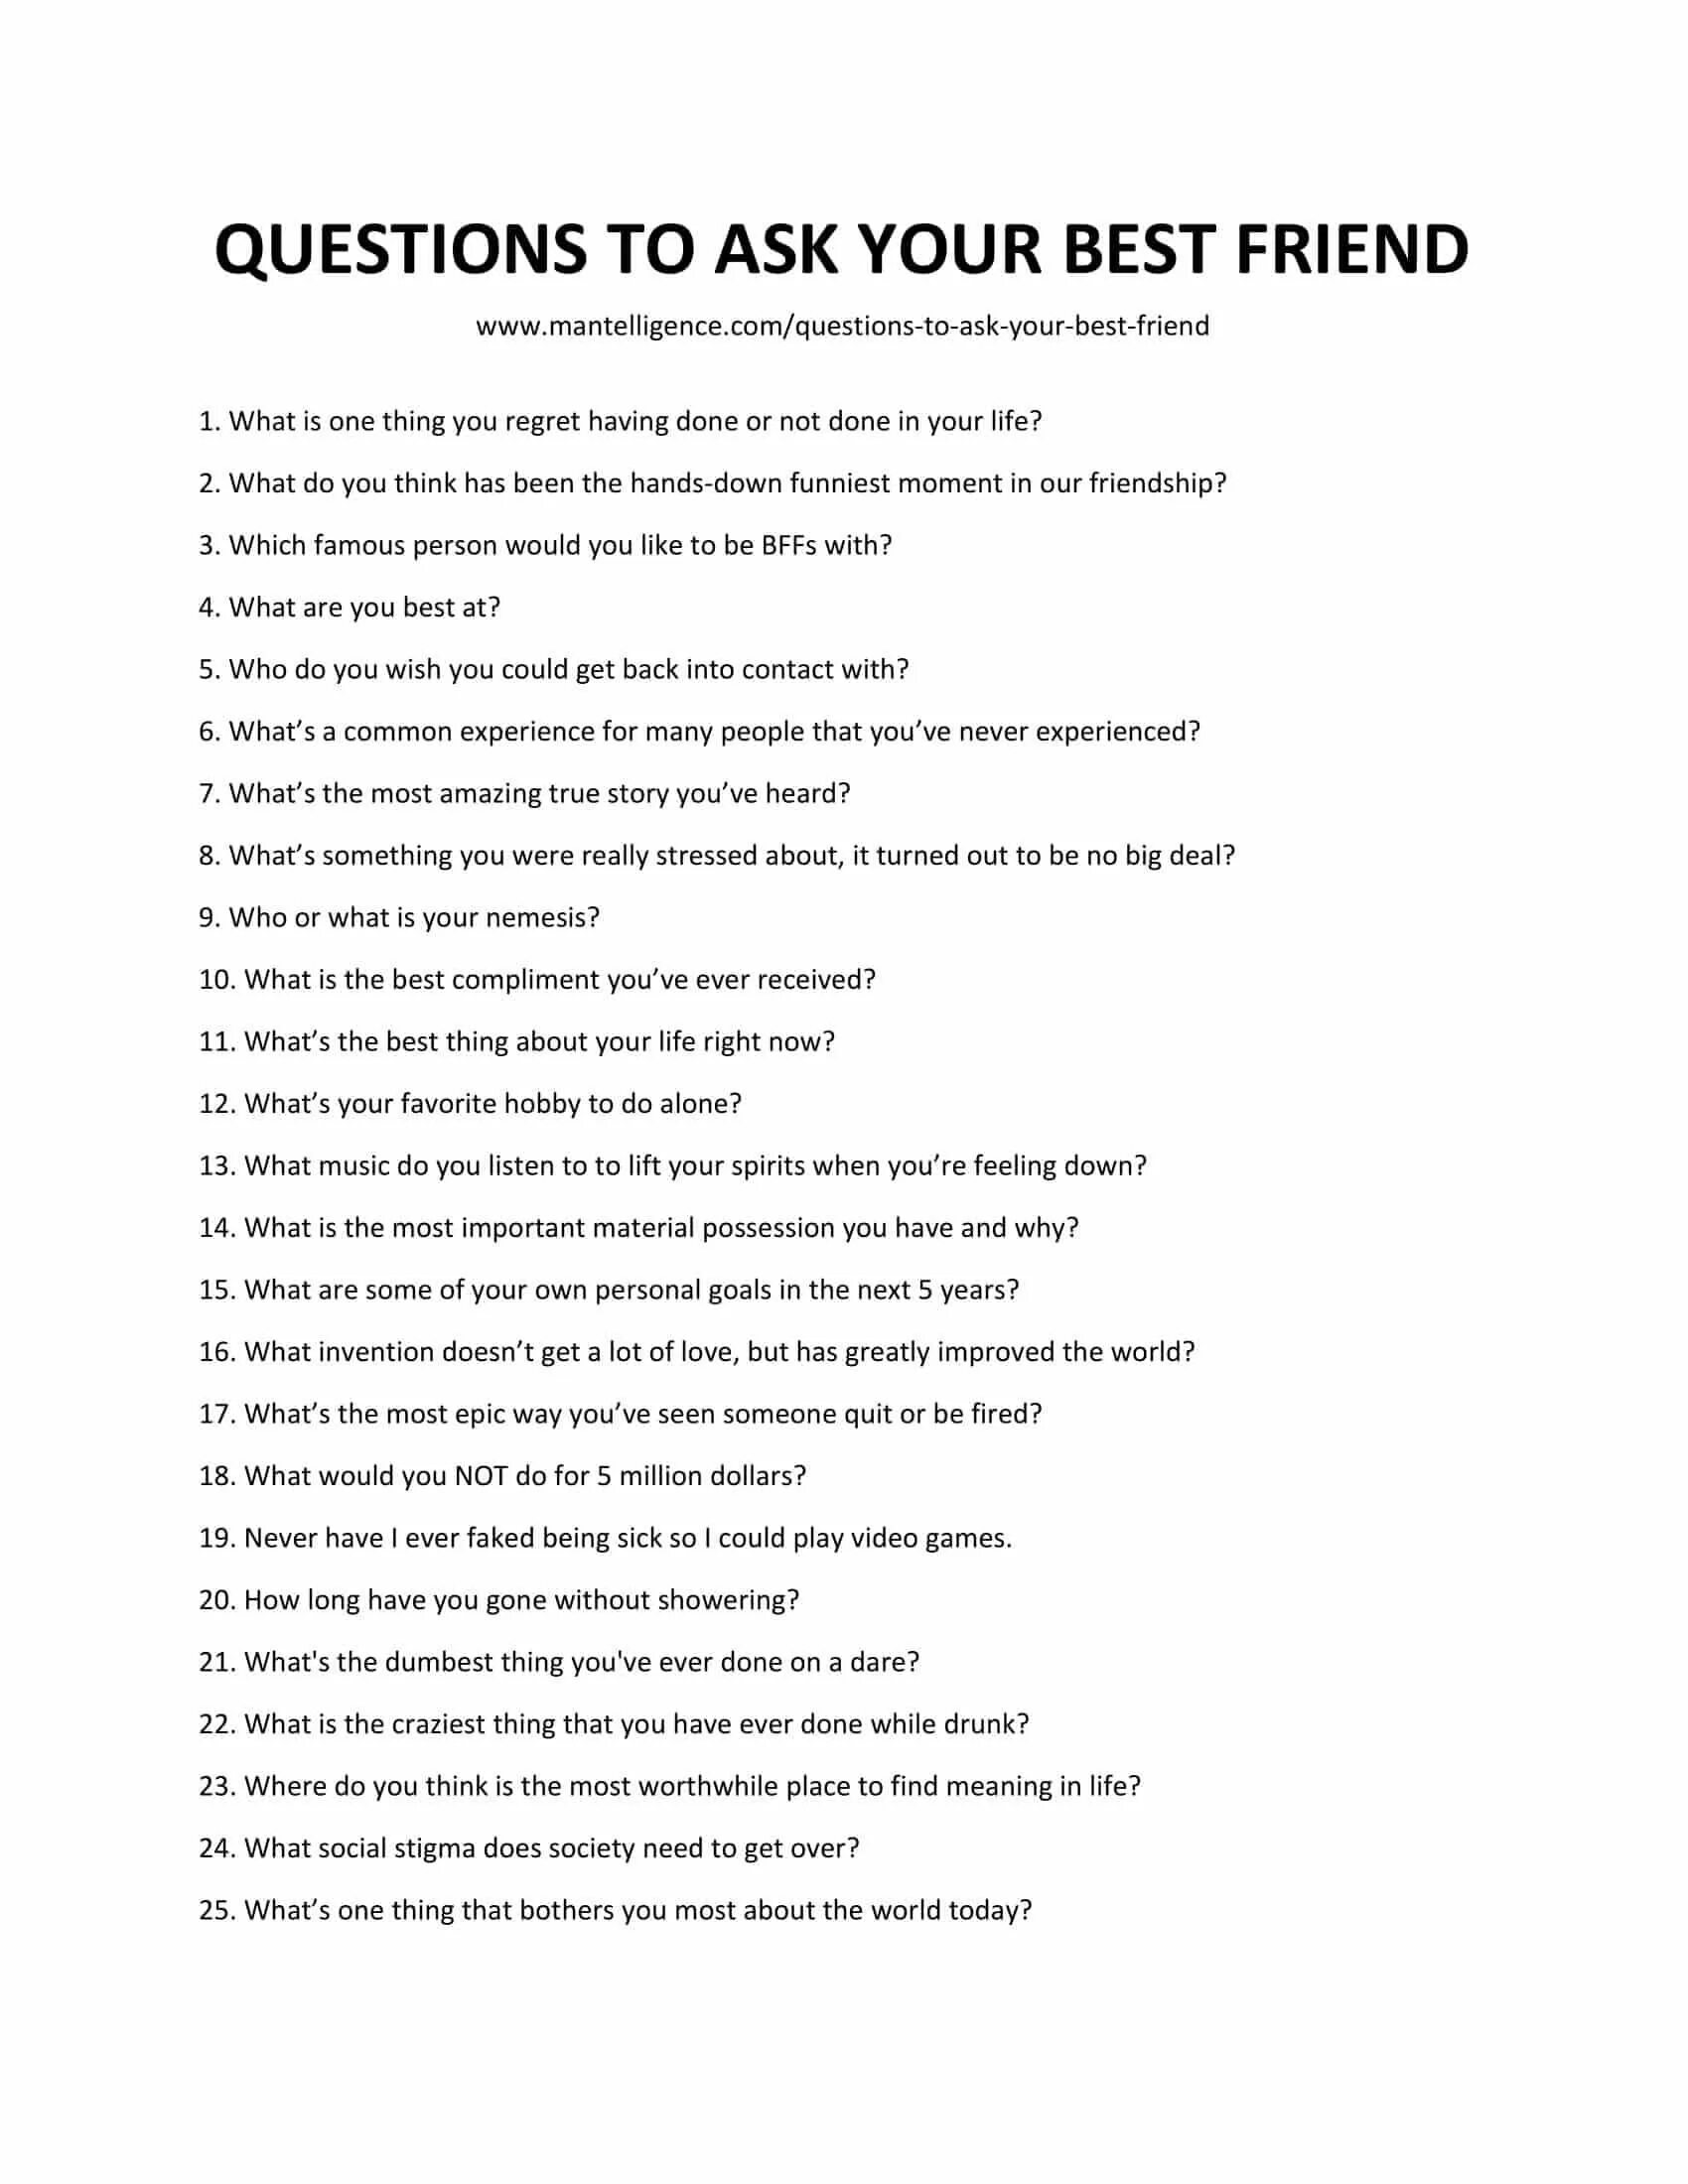 100 Questions to ask. Questions for dating. List Truth or Dare questions. [ Вопросы | questions ]. When you know you know meaning